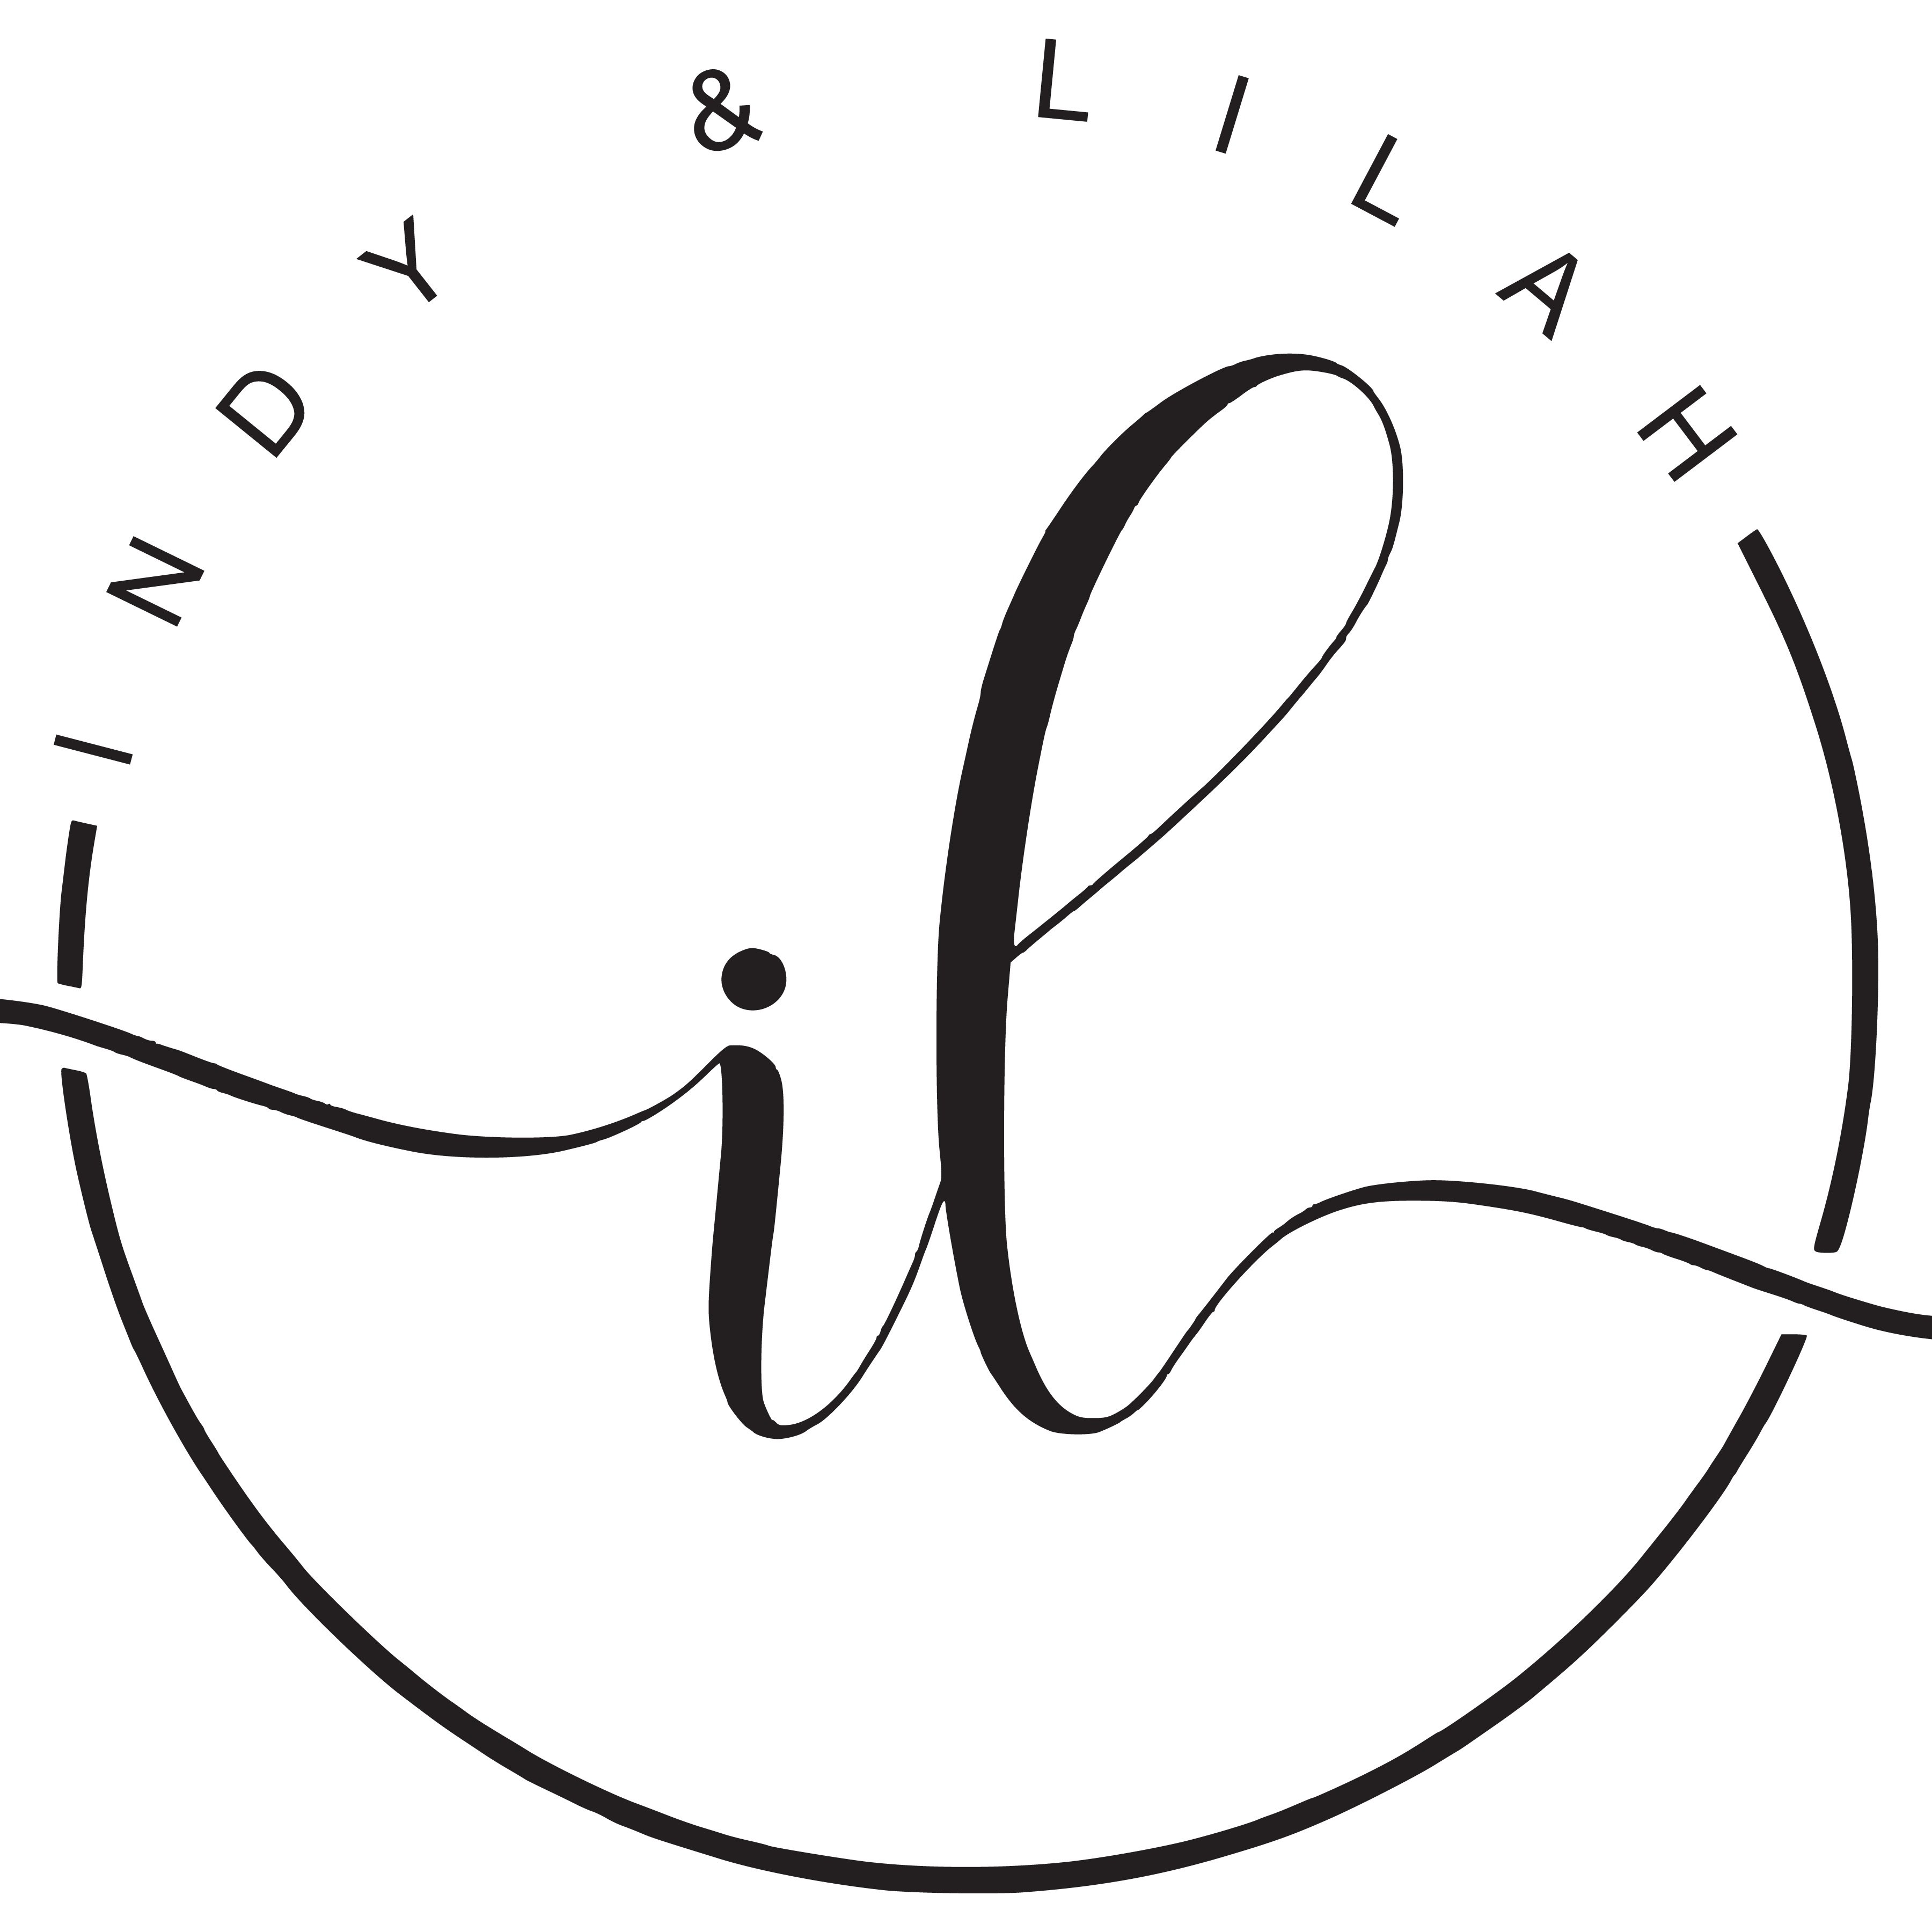 Indy & Lilah - Indy & Lilah, Two Sisters making Award Winning Luxury children's wear. Press enquiries only: Support@sindylilah.com